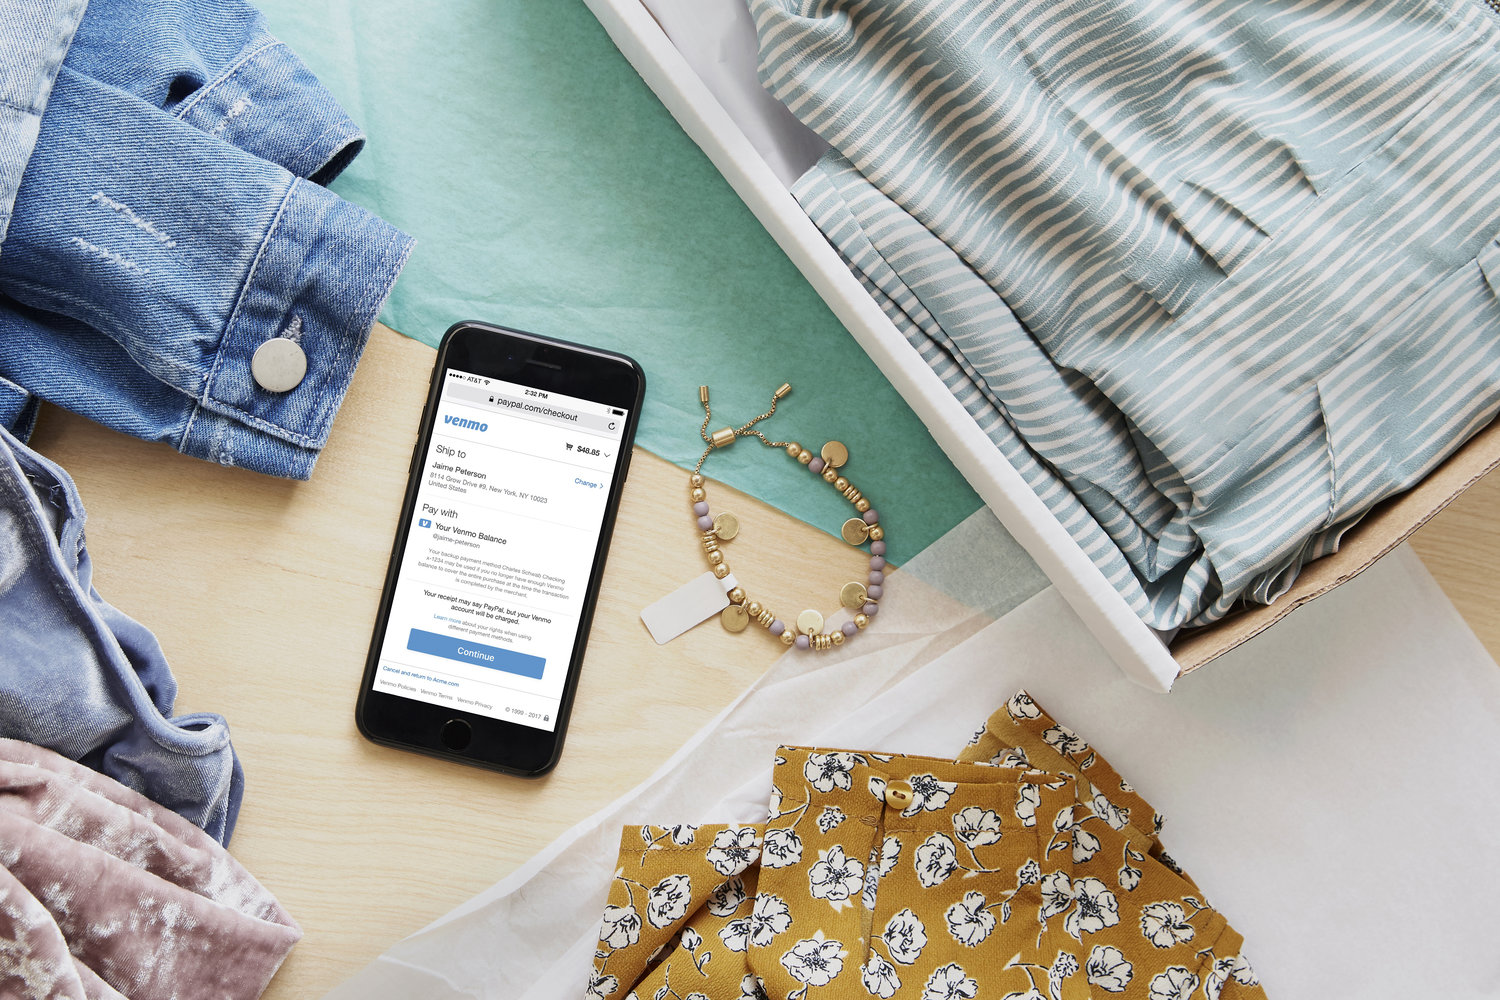 https://techcrunch.com/2017/10/17/venmo-users-can-now-shop-online-anywhere-paypal-is-accepted-in-the-u-s/